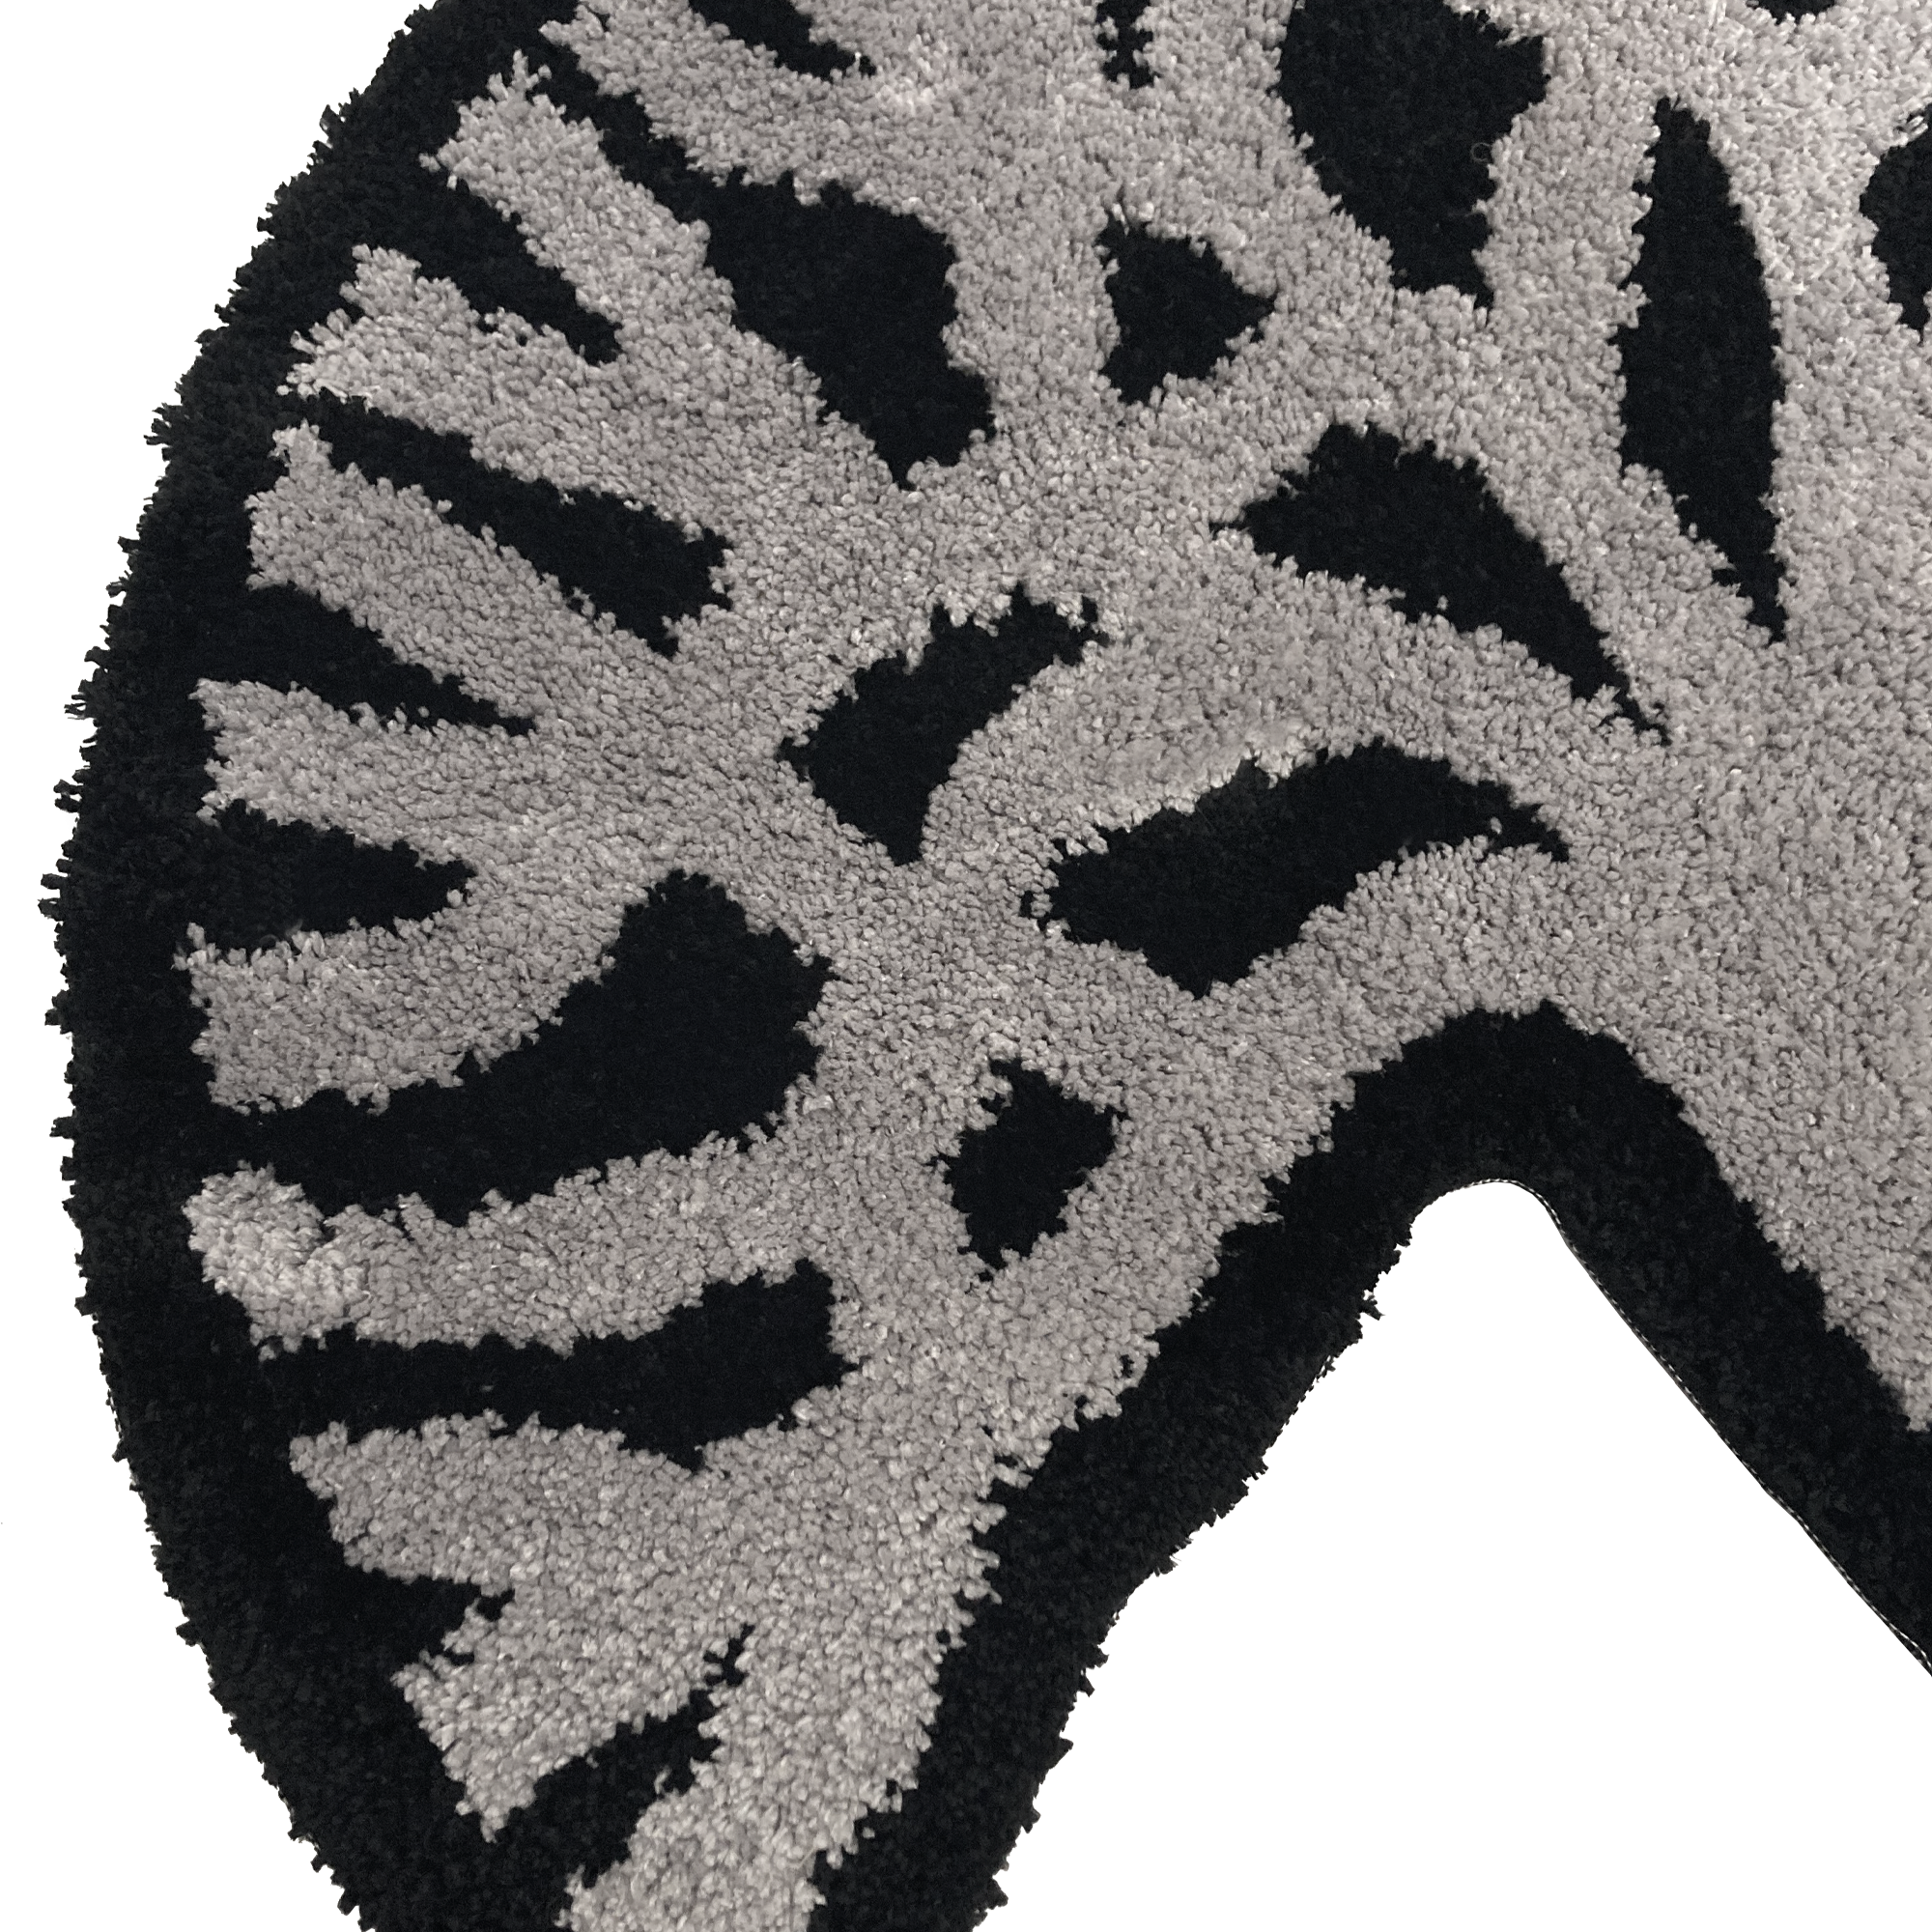 Detailed close-up of section of the Oaklandish tree logo on black and light grey area rug.